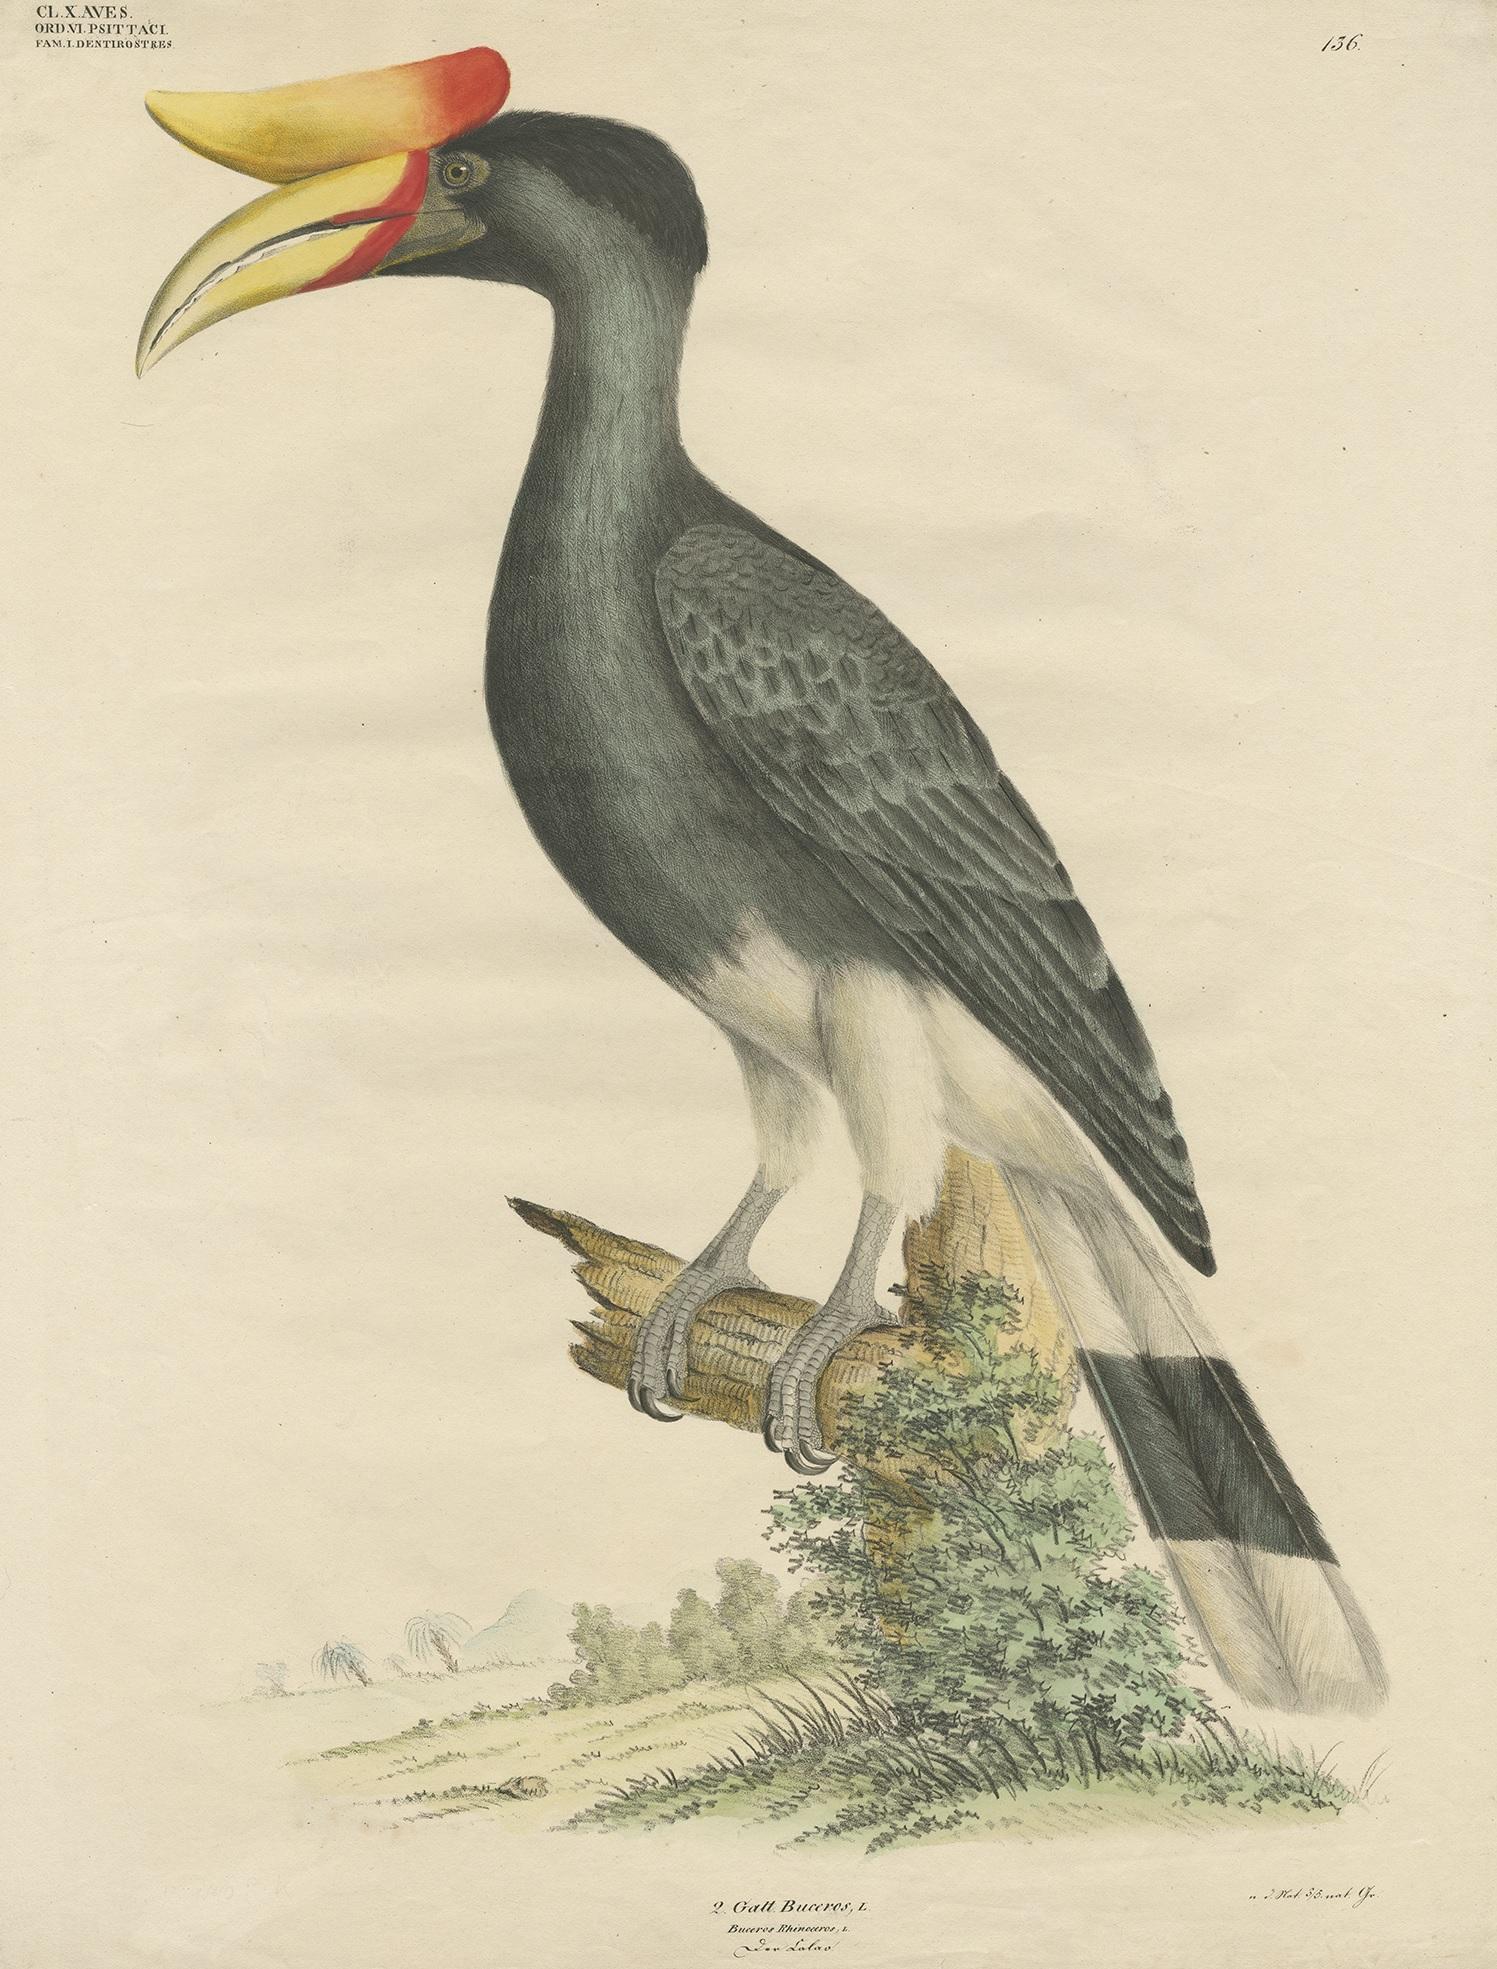 Antique bird print titled 'Gatt Buceros'. Large lithograph of the rhinoceros hornbill, a large species of forest hornbill (Bucerotidae). In captivity it can live for up to 35 years. It is found in lowland and montane, tropical and subtropical